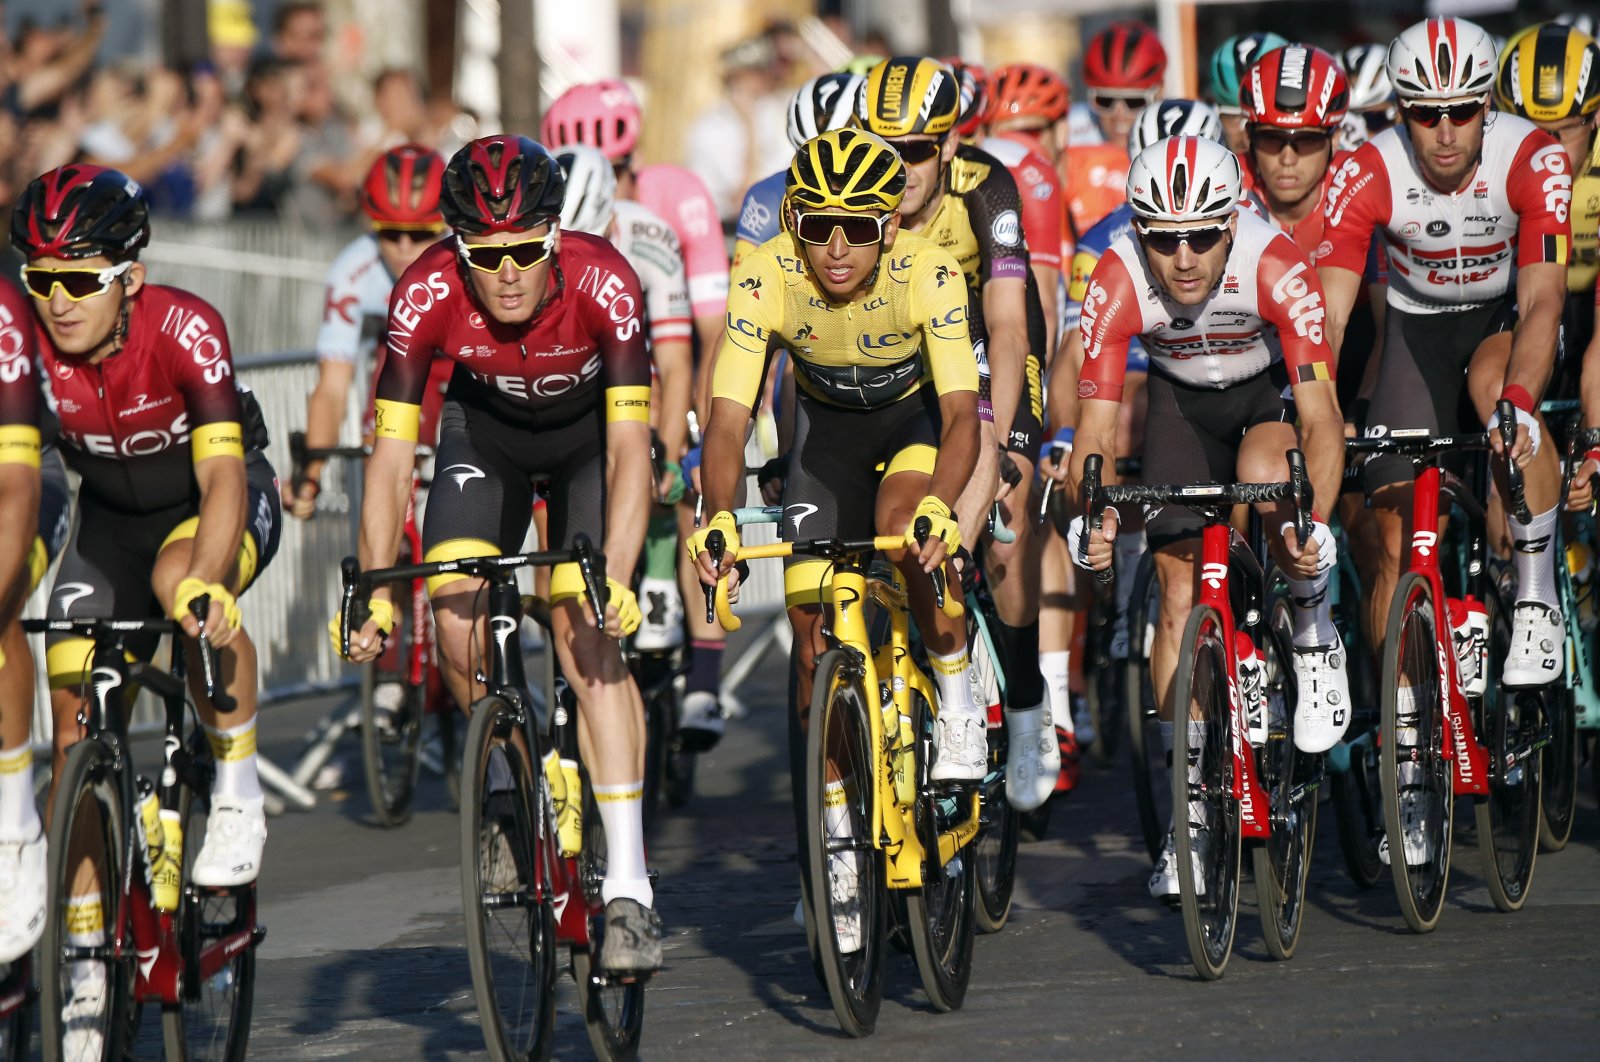 Colombia's Egan Bernal, wearing the overall leader's yellow jersey (C), races on the Champs Elysees during the Tour de France in Paris, France, July 28, 2019. (AP Photo)